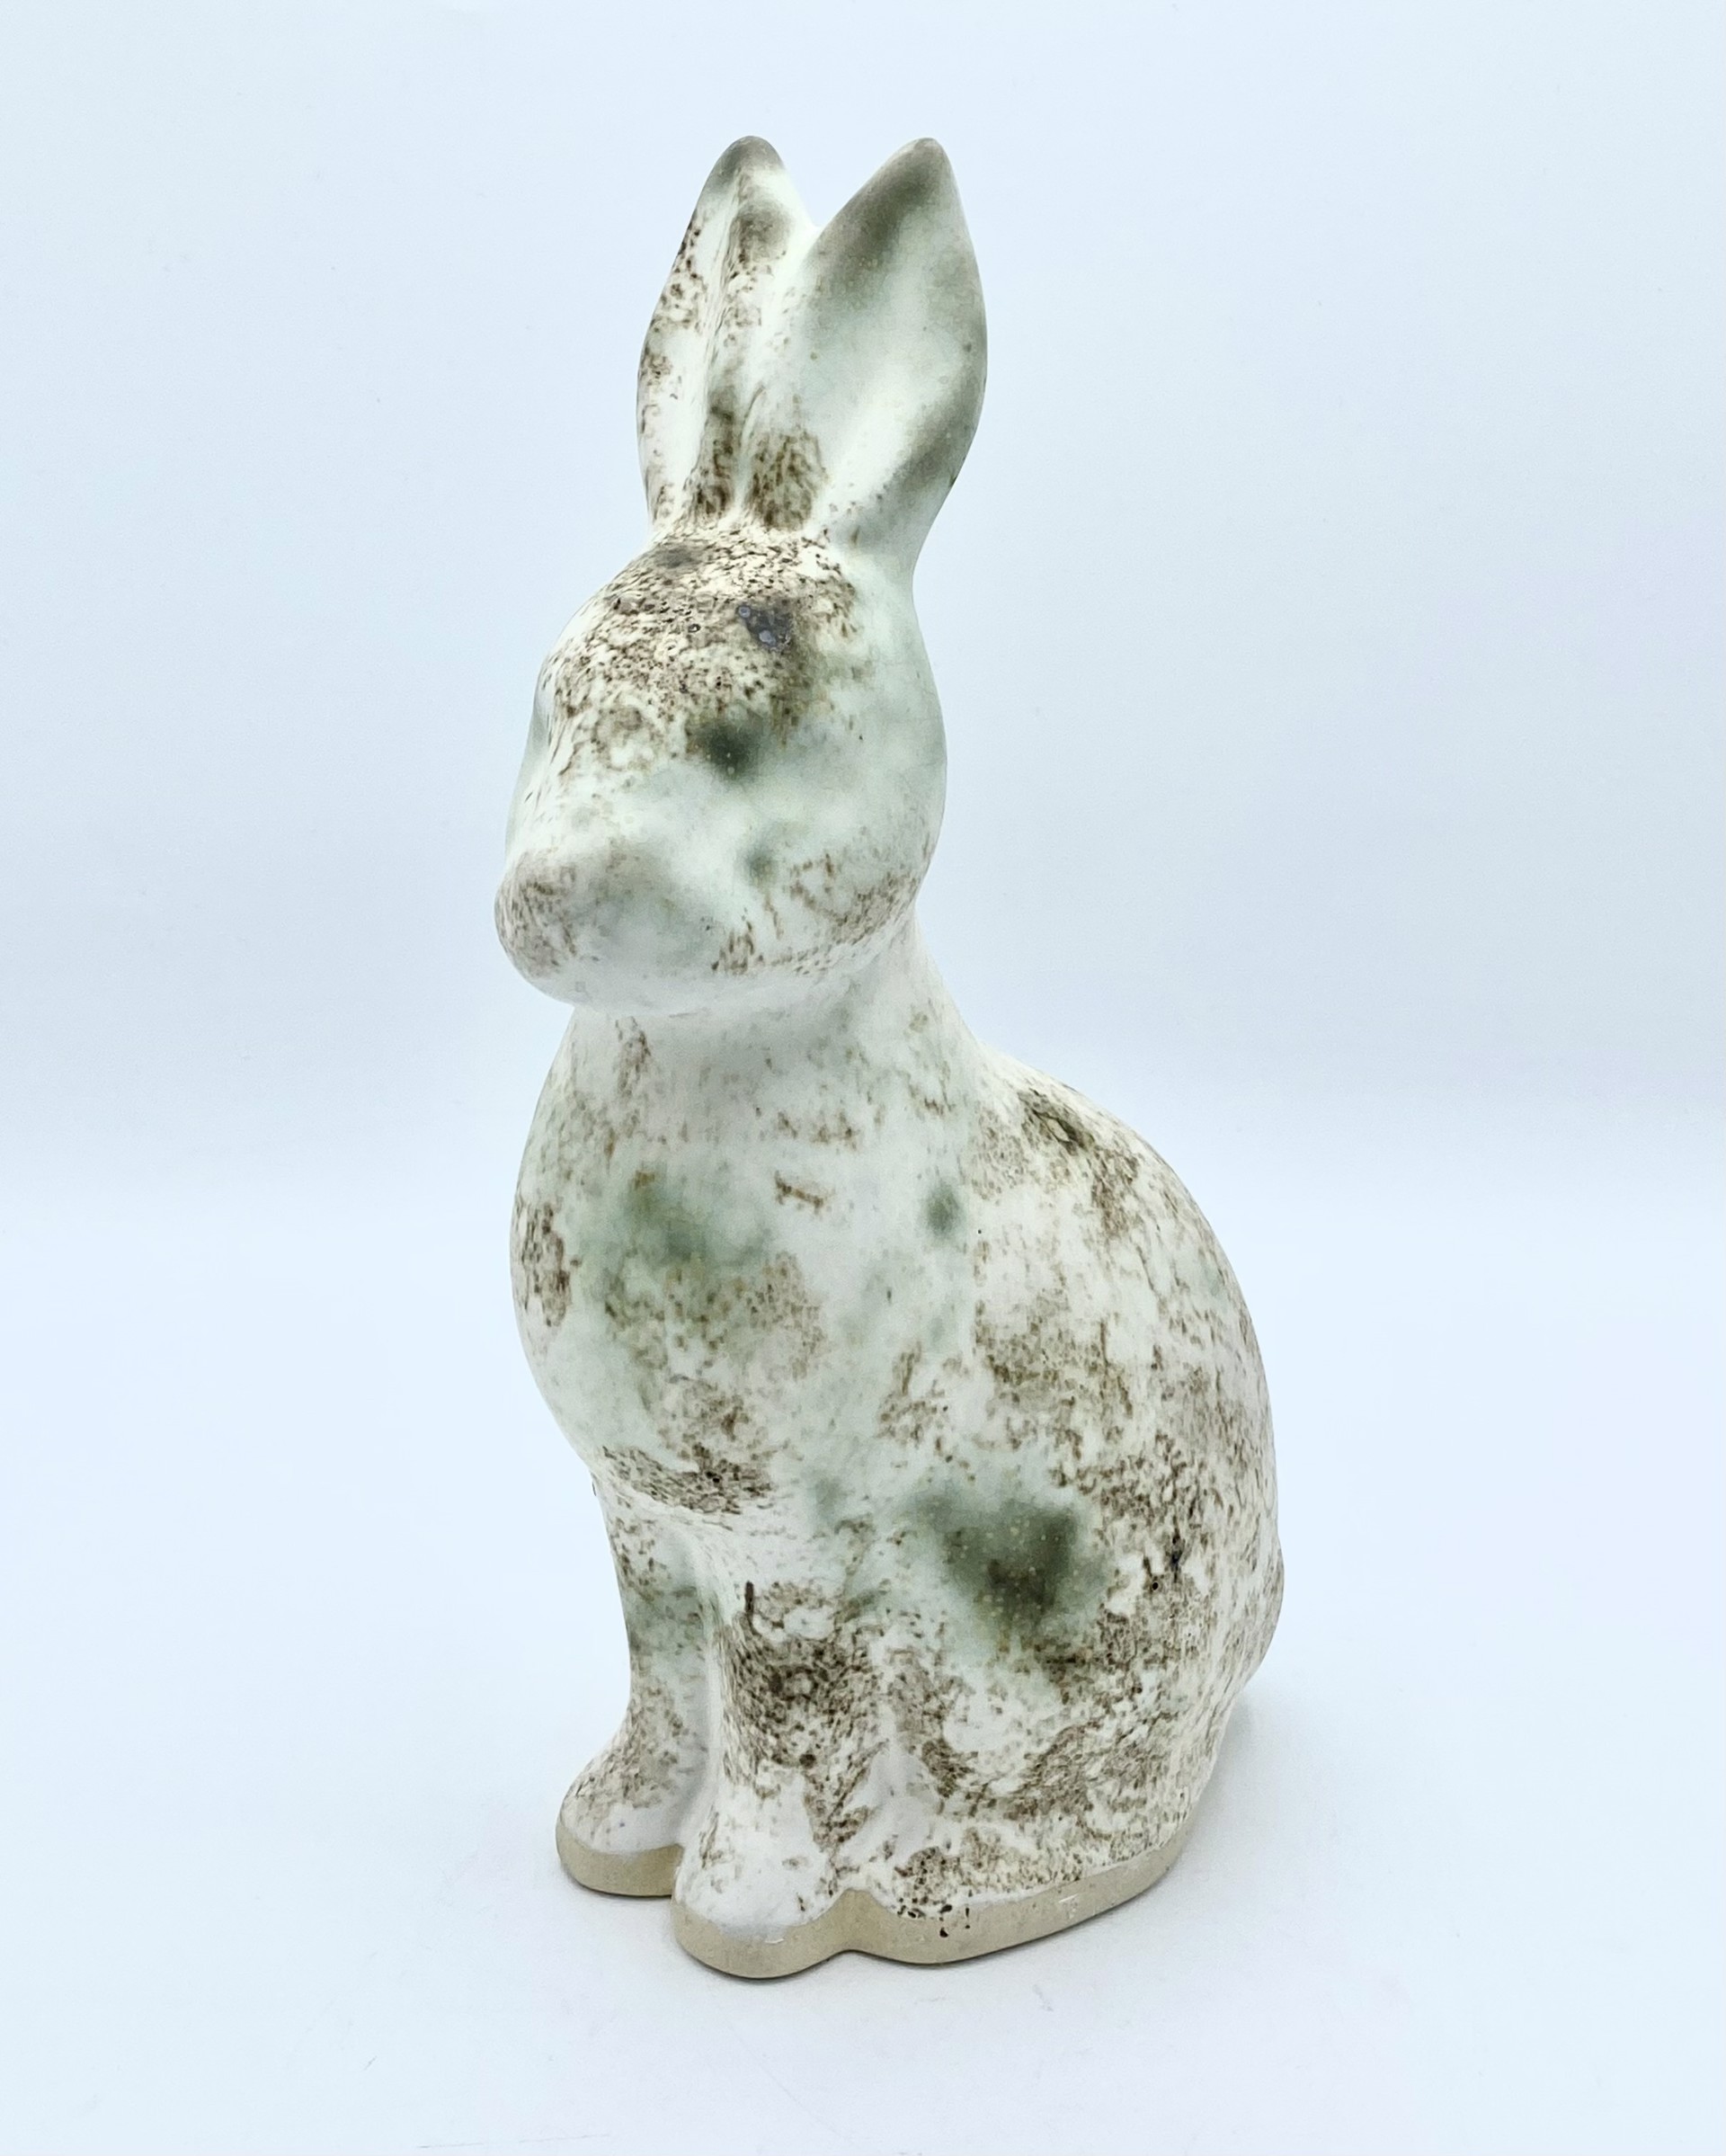 Tall Rabbit 1 by Satterfield Pottery